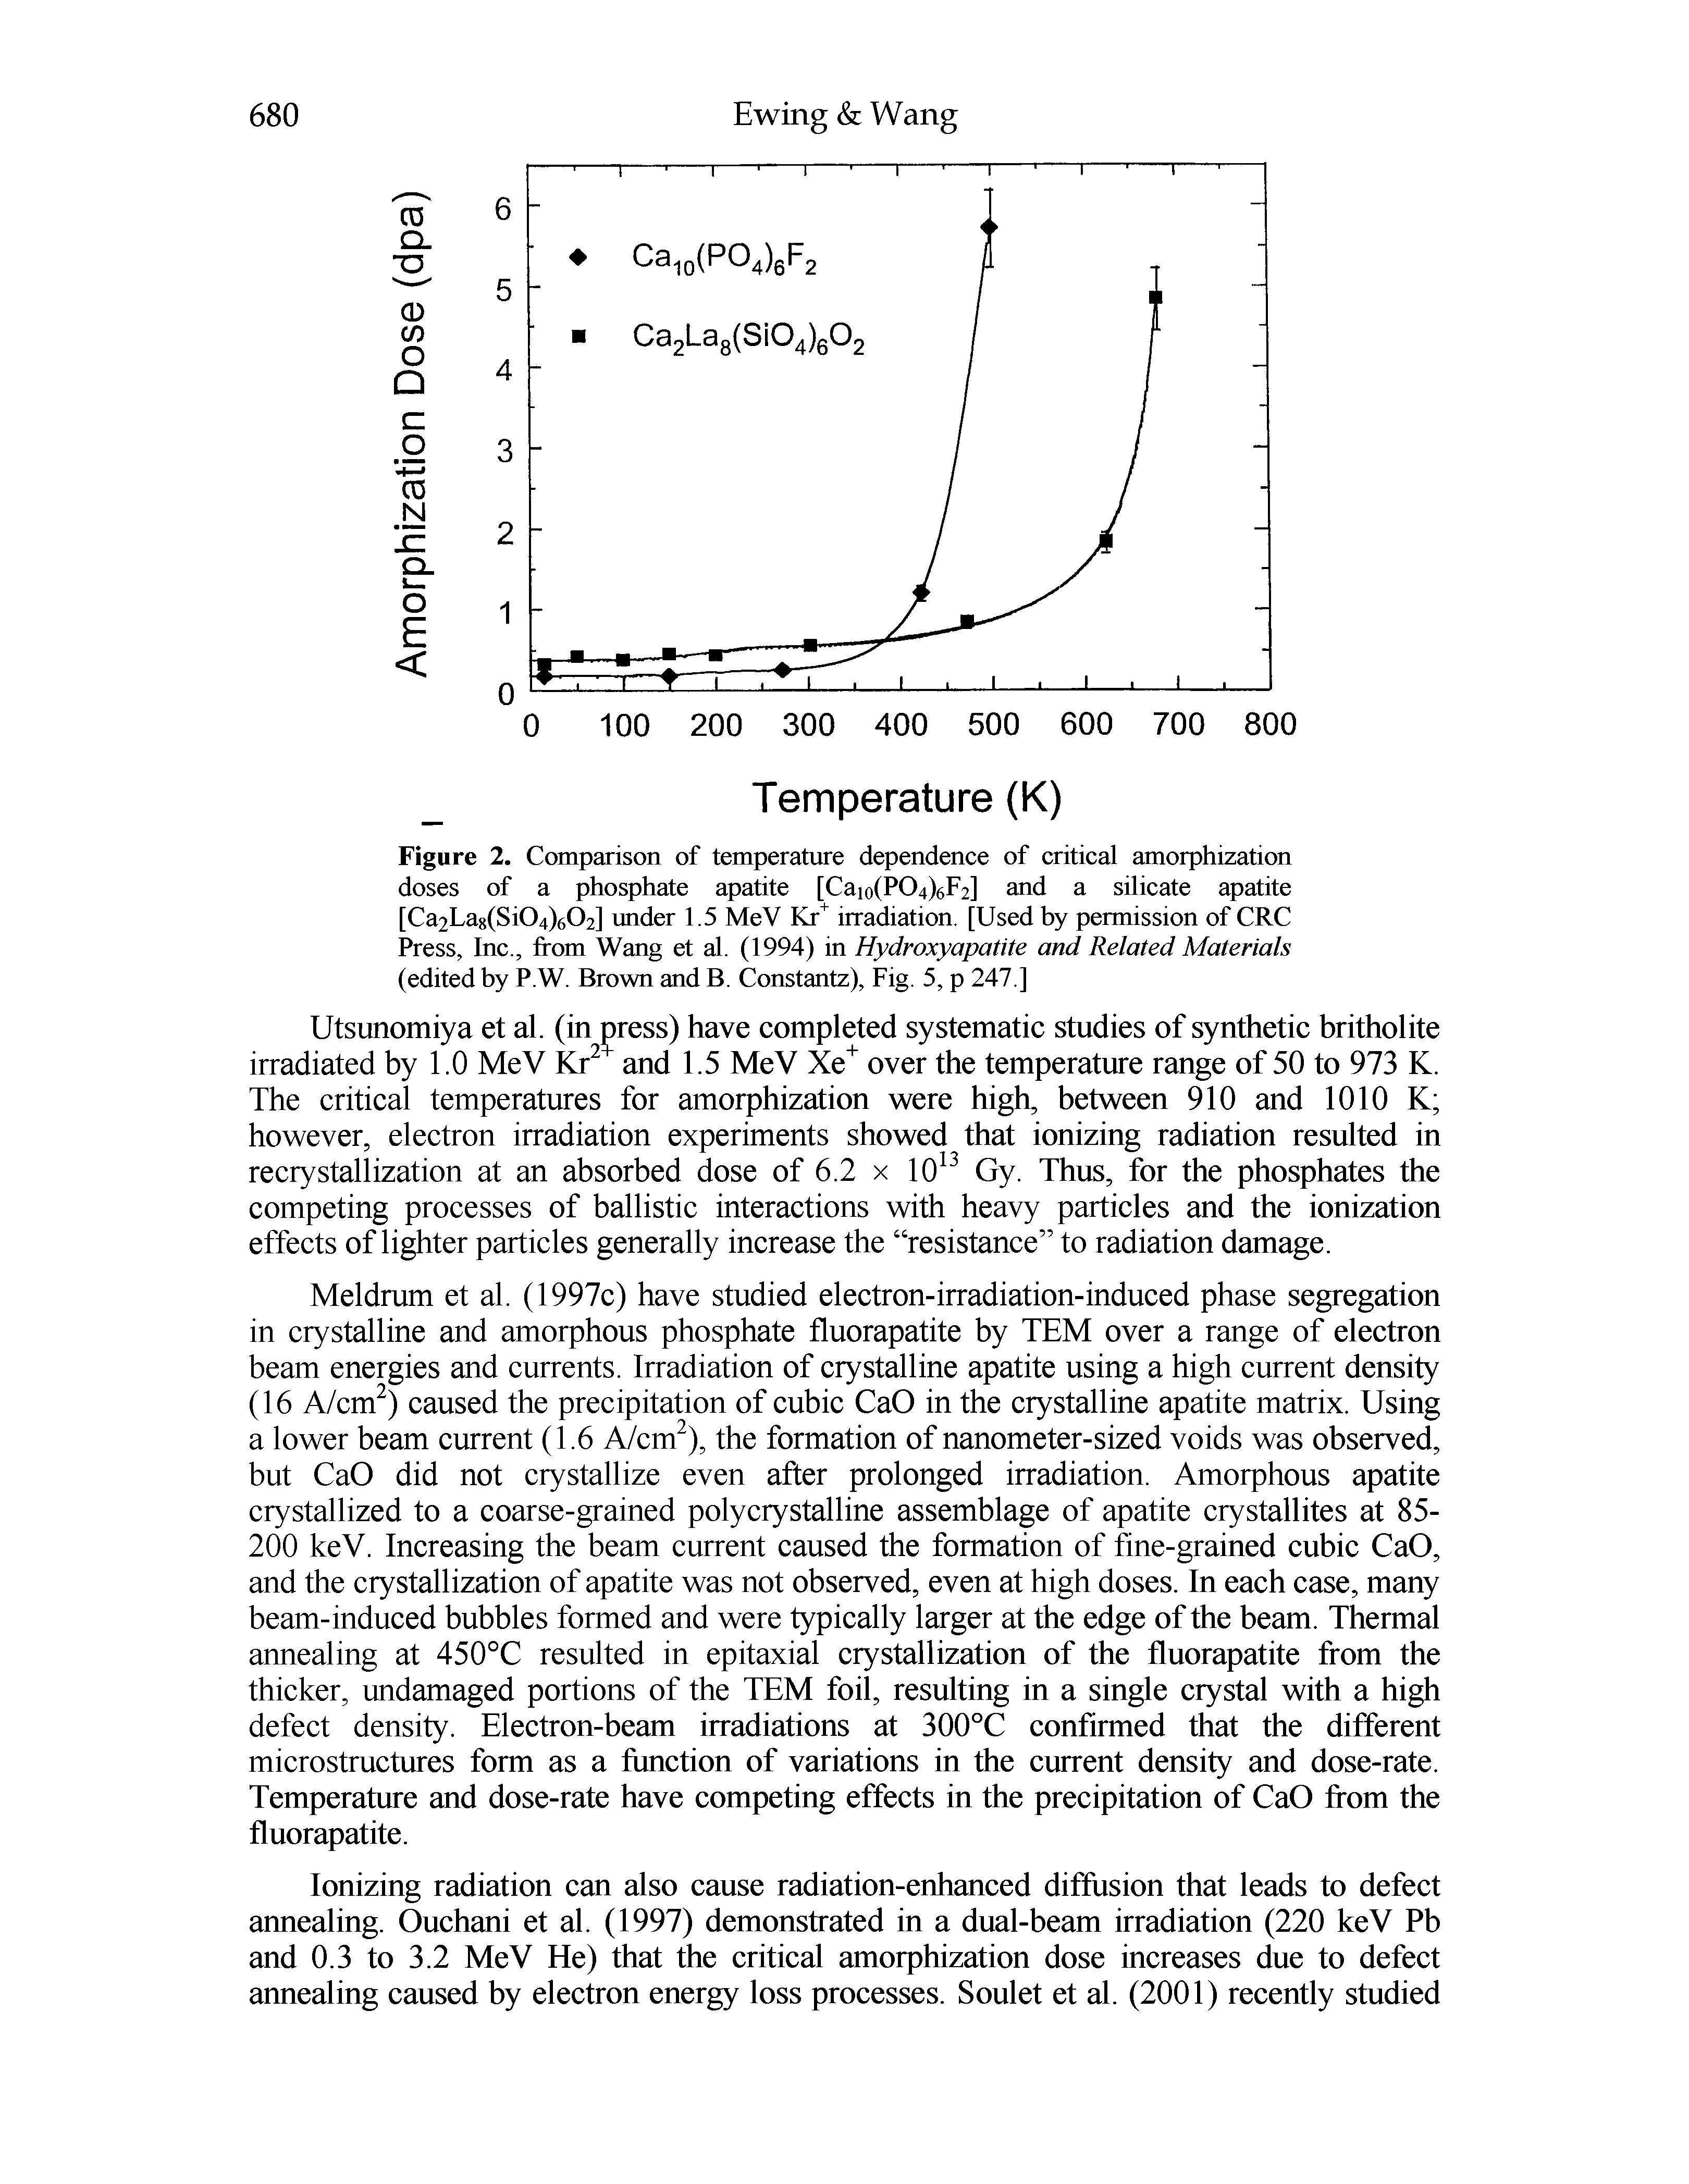 Figure 2. Comparison of temperature dependence of critical amorphization doses of a phosphate apatite [Caio(P04)6p2] and a silicate apatite [Ca2La8(Si04)602] under 1.5 MeV Kr irradiation. [Used by permission of CRC Press, Inc., from Wang et al. (1994) in Hydroxyapatite and Related Materials (edited by P.W. Brown and B. Constantz), Fig. 5, p 247.]...